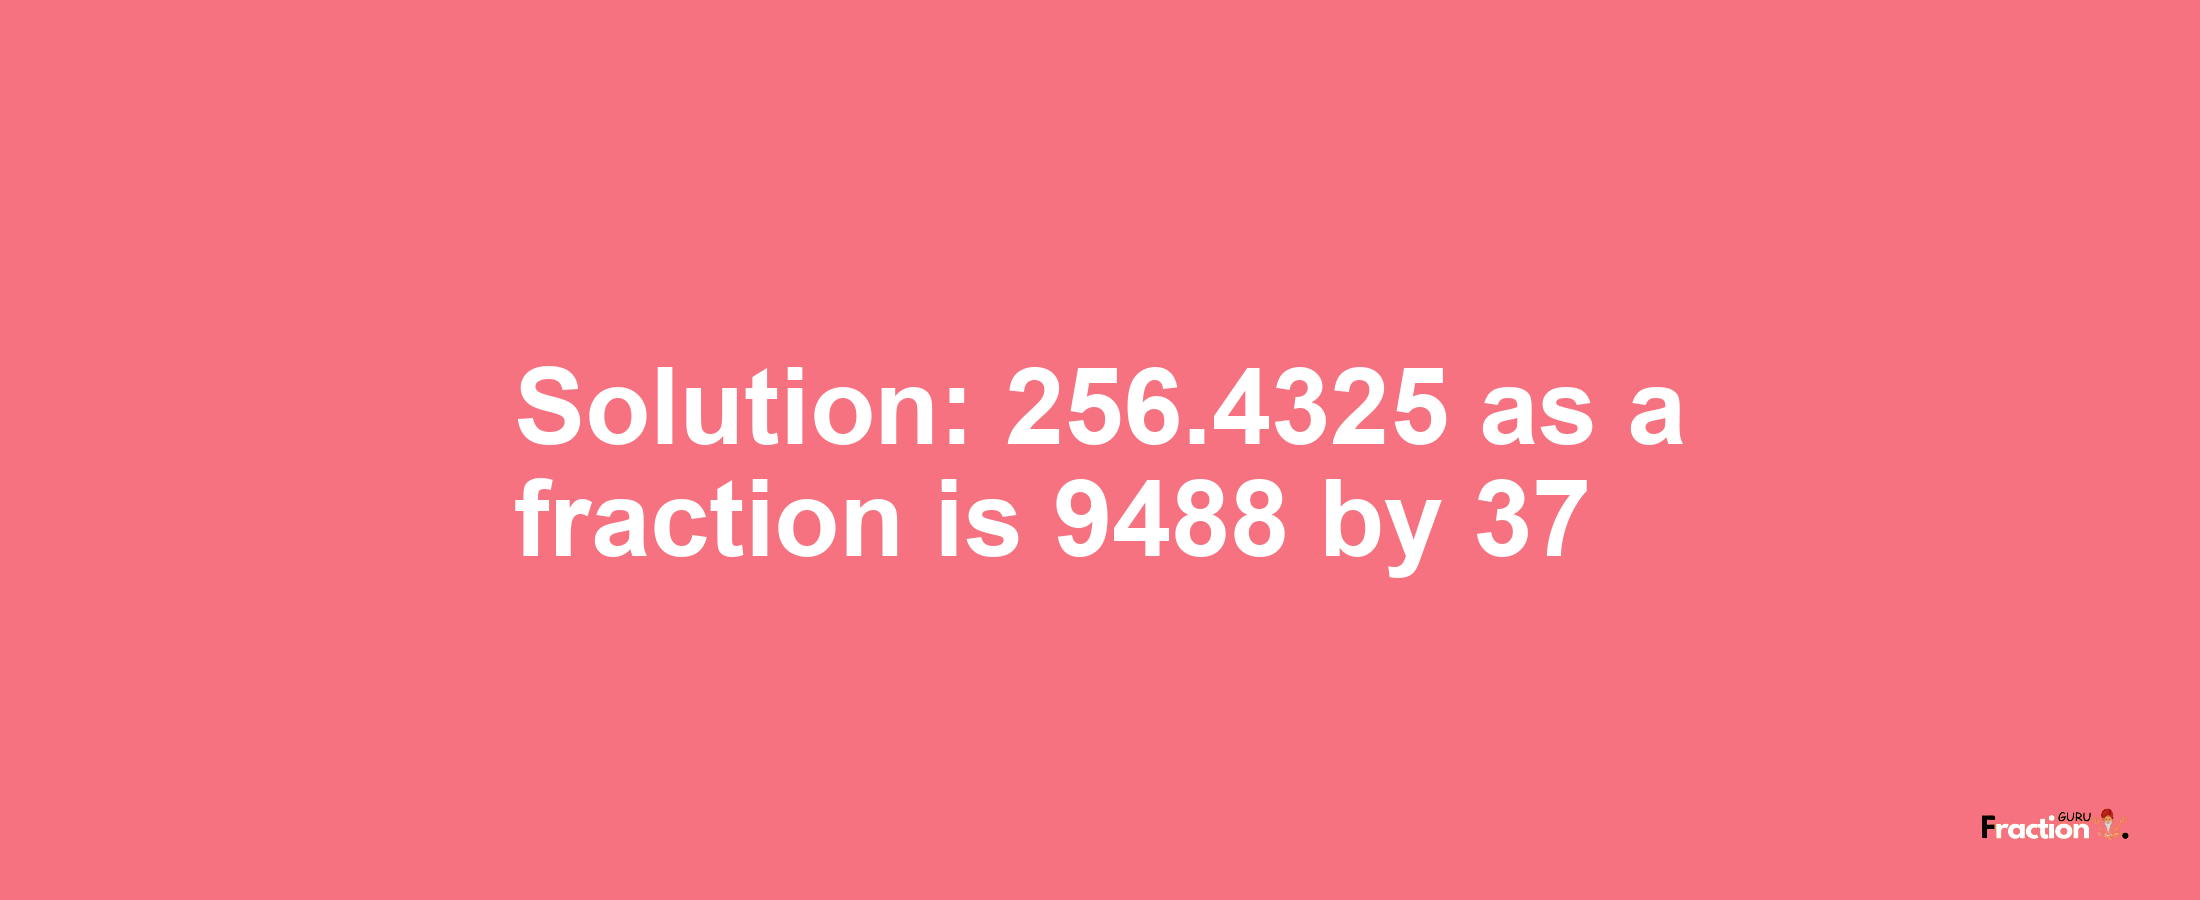 Solution:256.4325 as a fraction is 9488/37